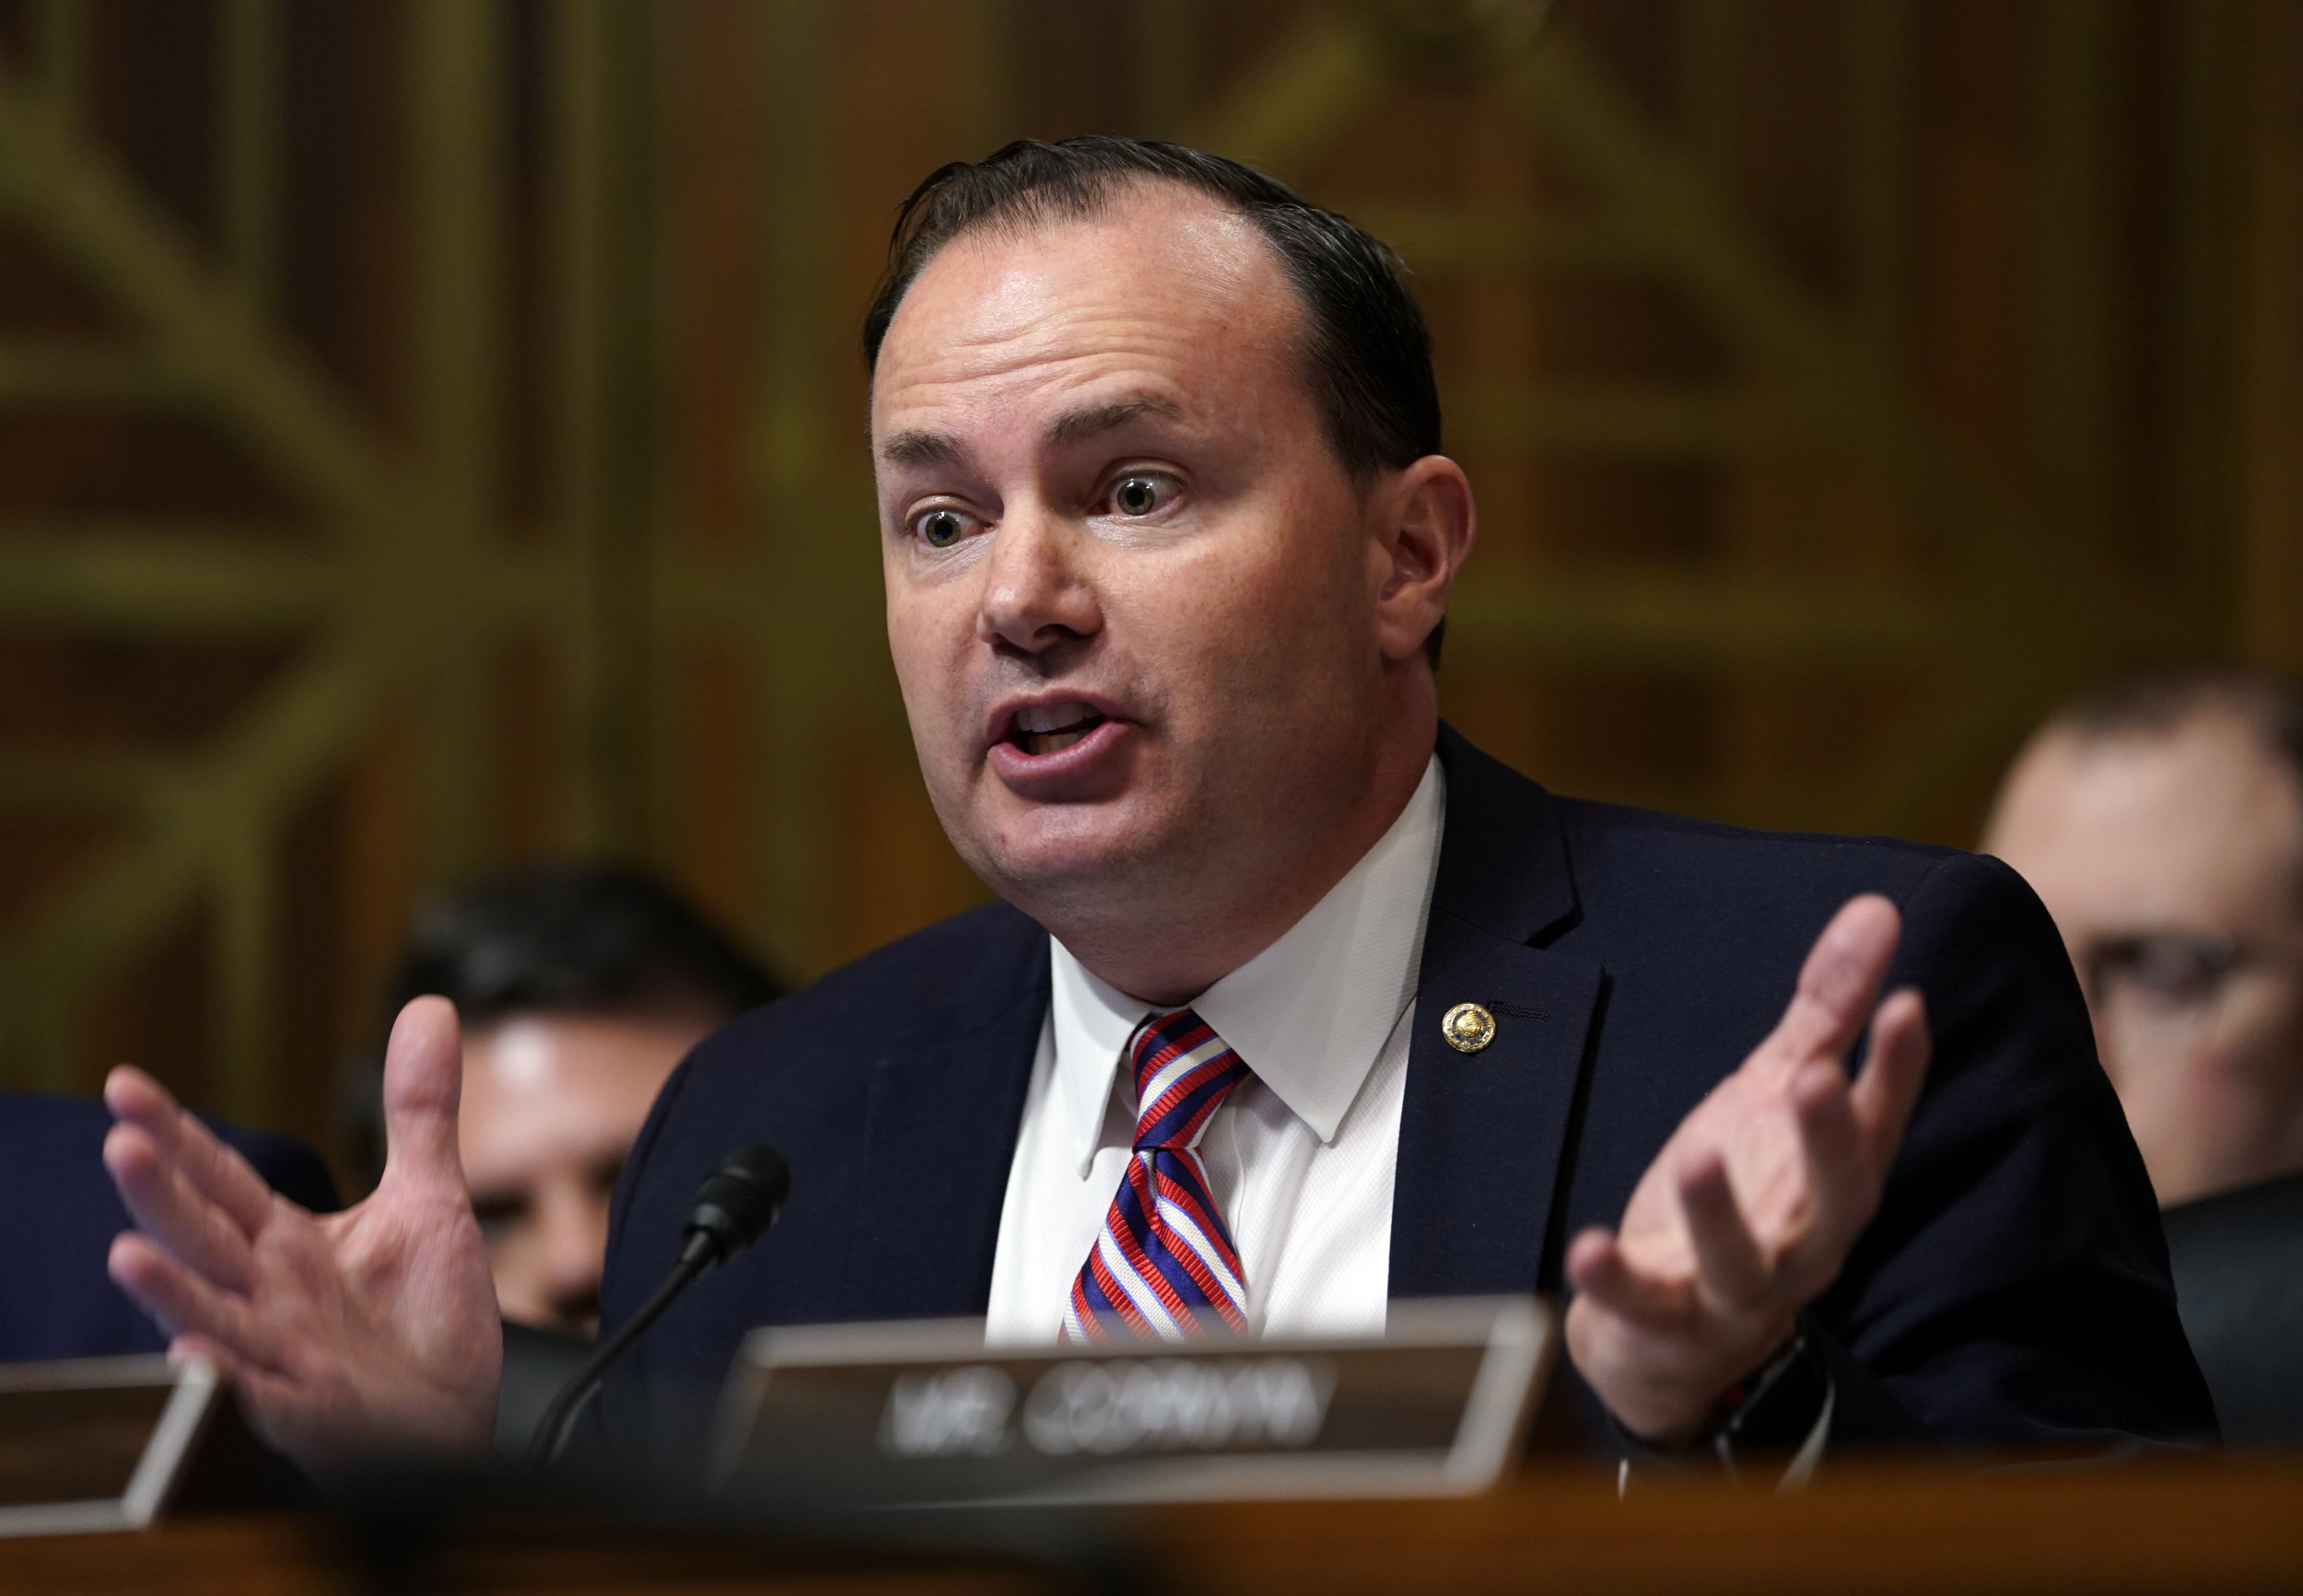 Senators are confused after Mike Lee accuses impeachment managers of falsely citing him